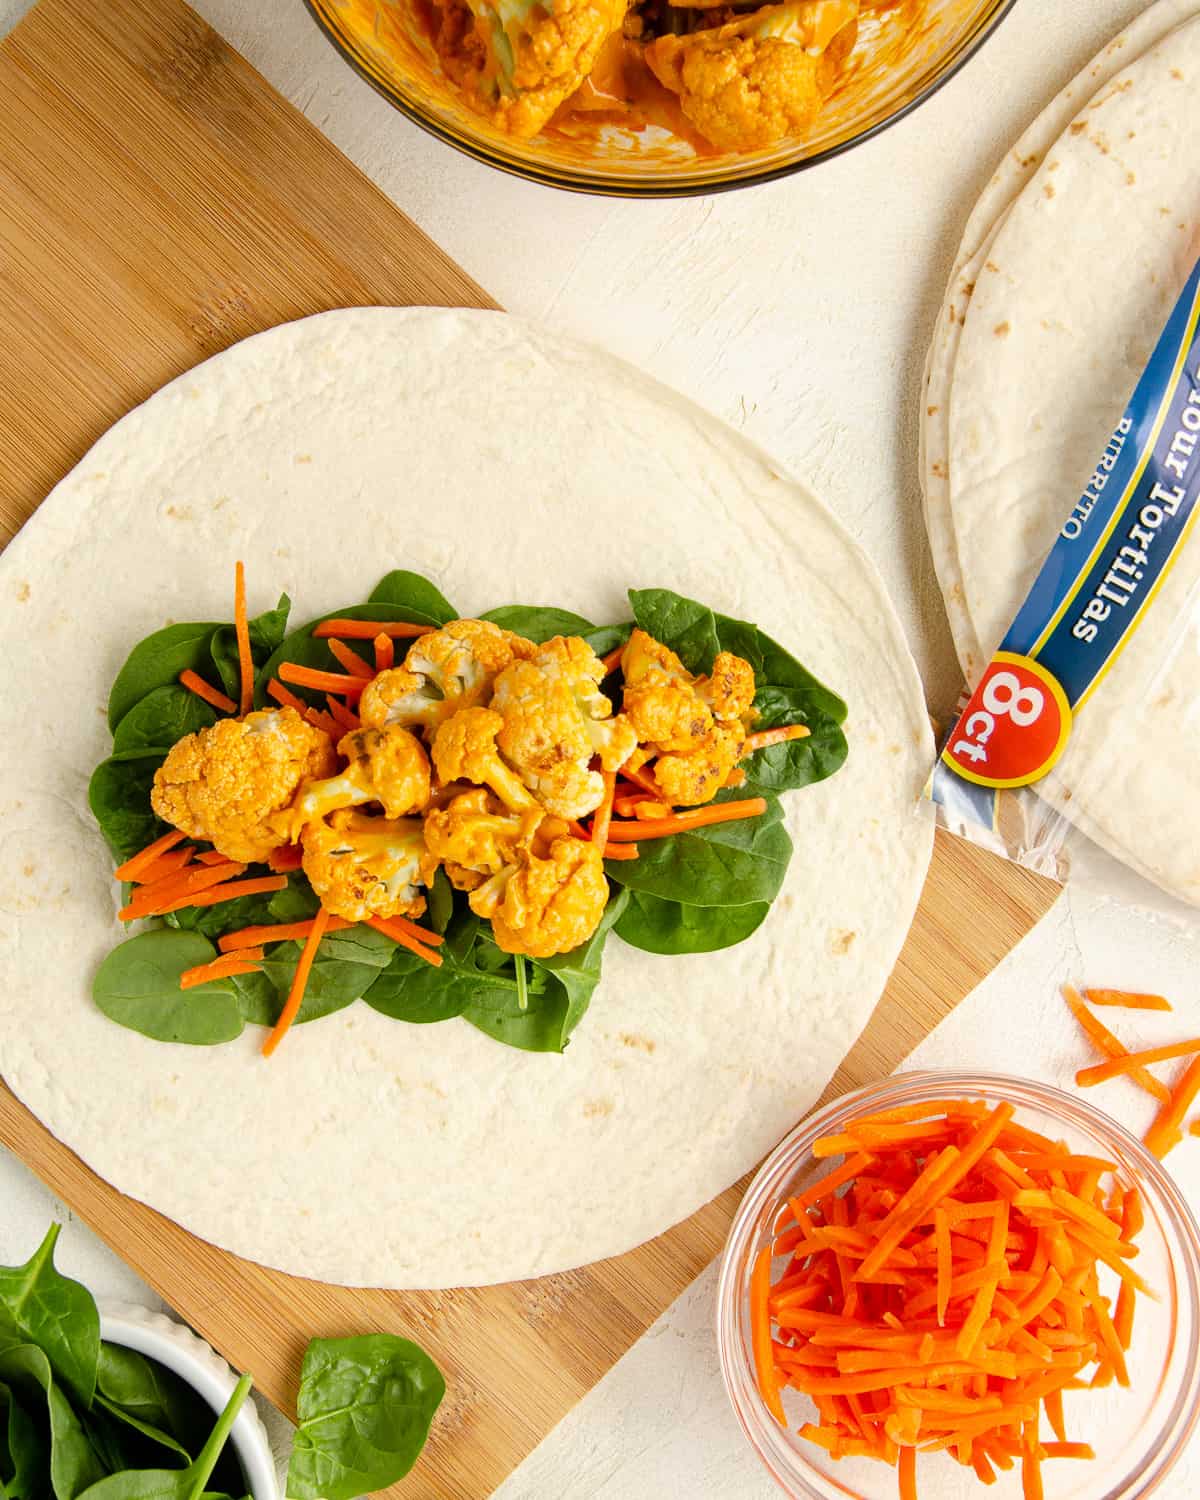 Step three of making the wrap: adding buffalo cauliflower on top of the carrots.